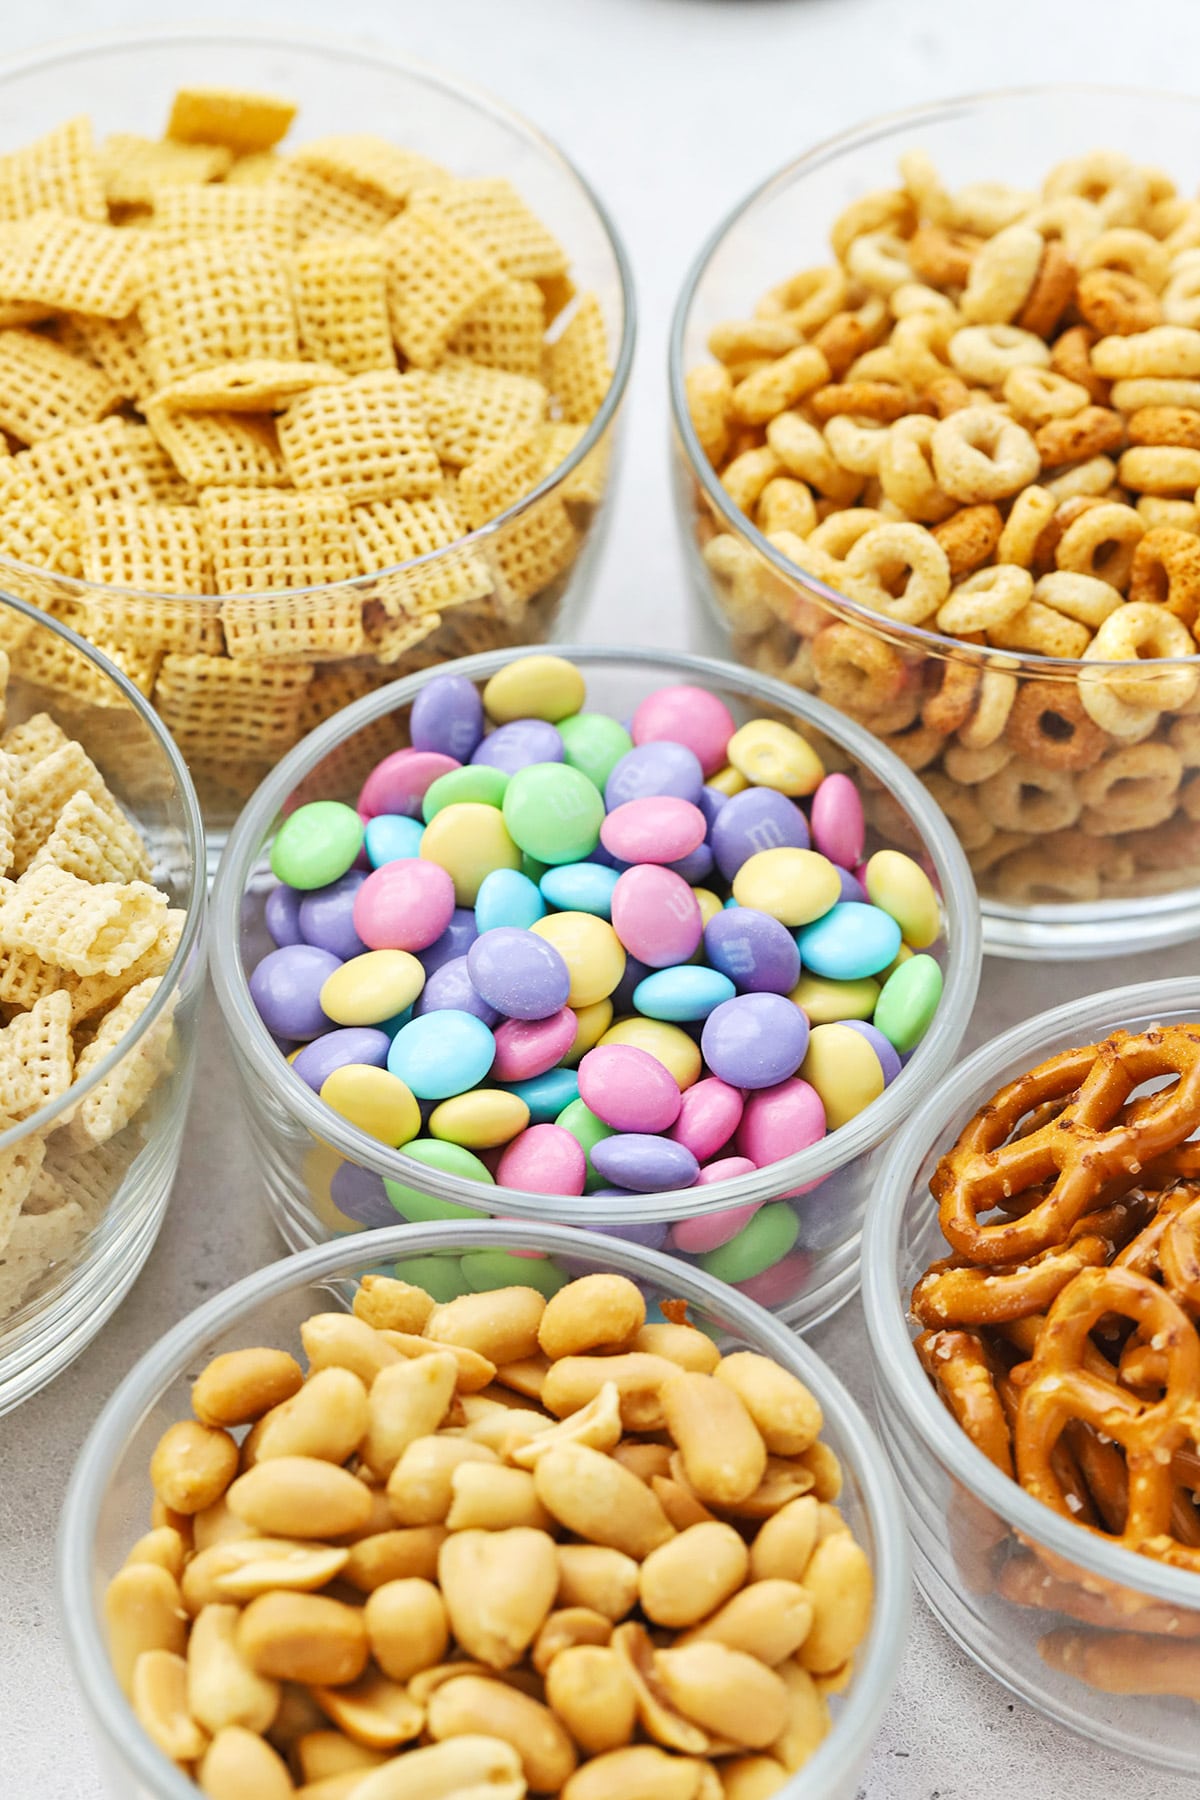 Ingredients for gluten-free bunny bait chex mix